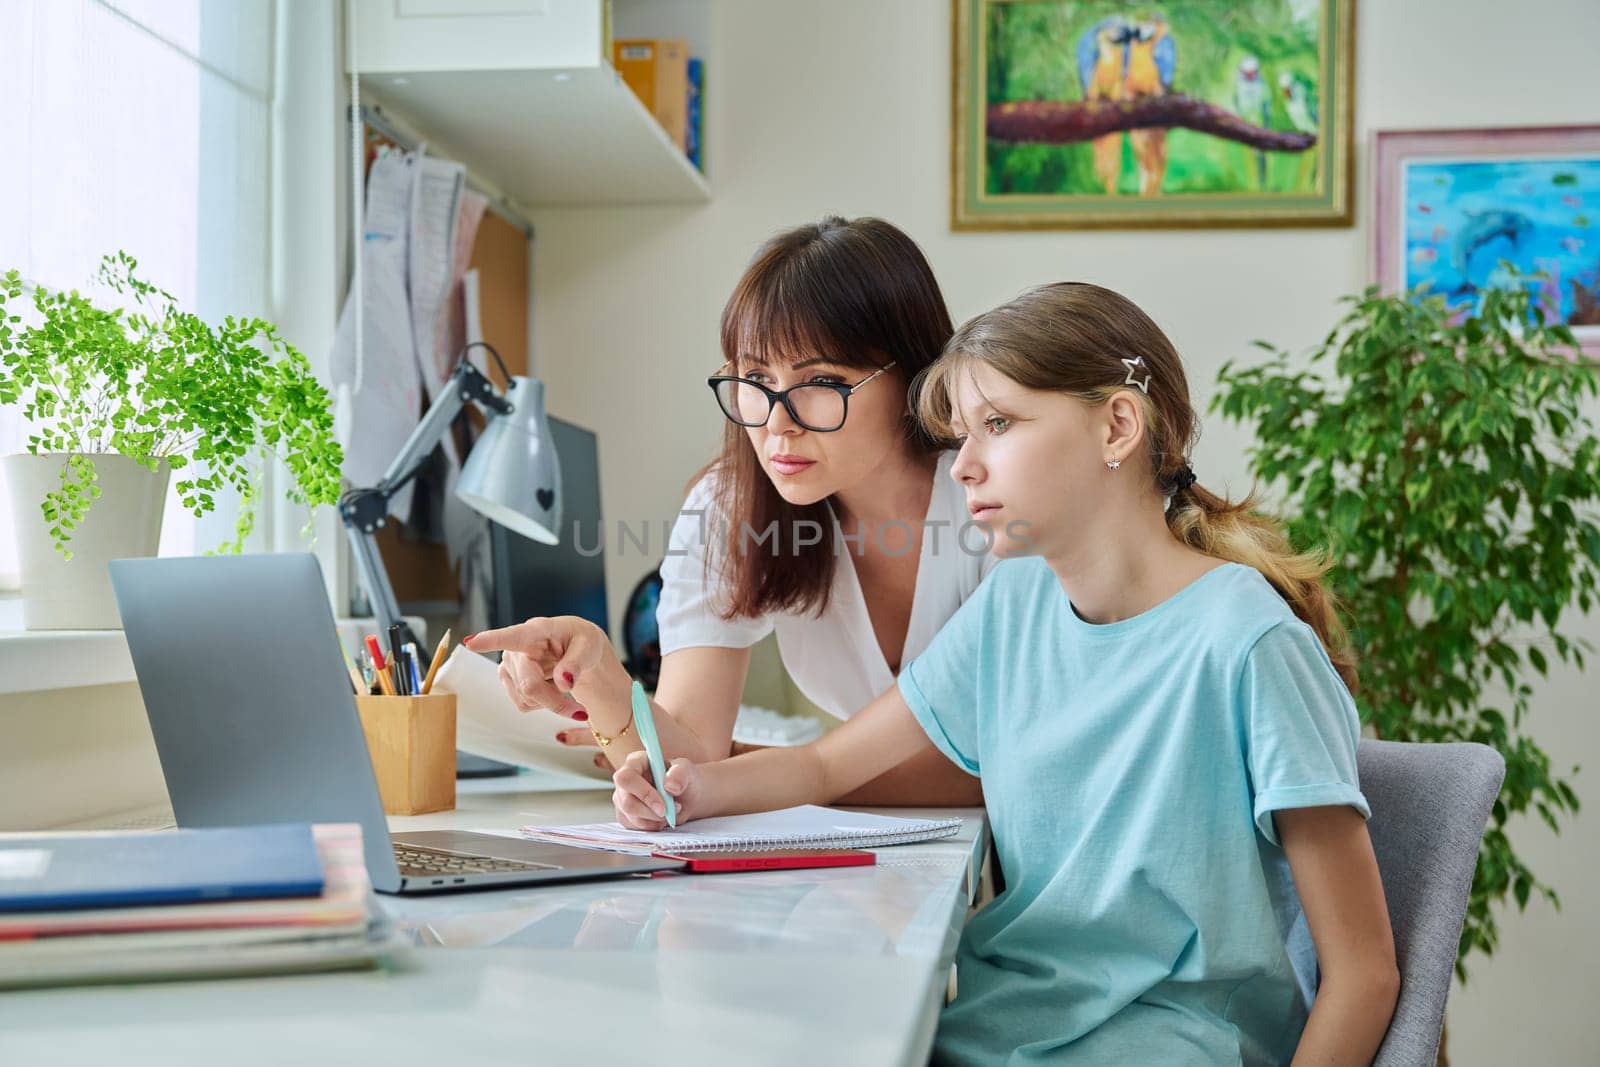 Mother helping preteen daughter to study, looking at laptop computer at desk together at home. Family, home lifestyle, school, education, study, kids concept